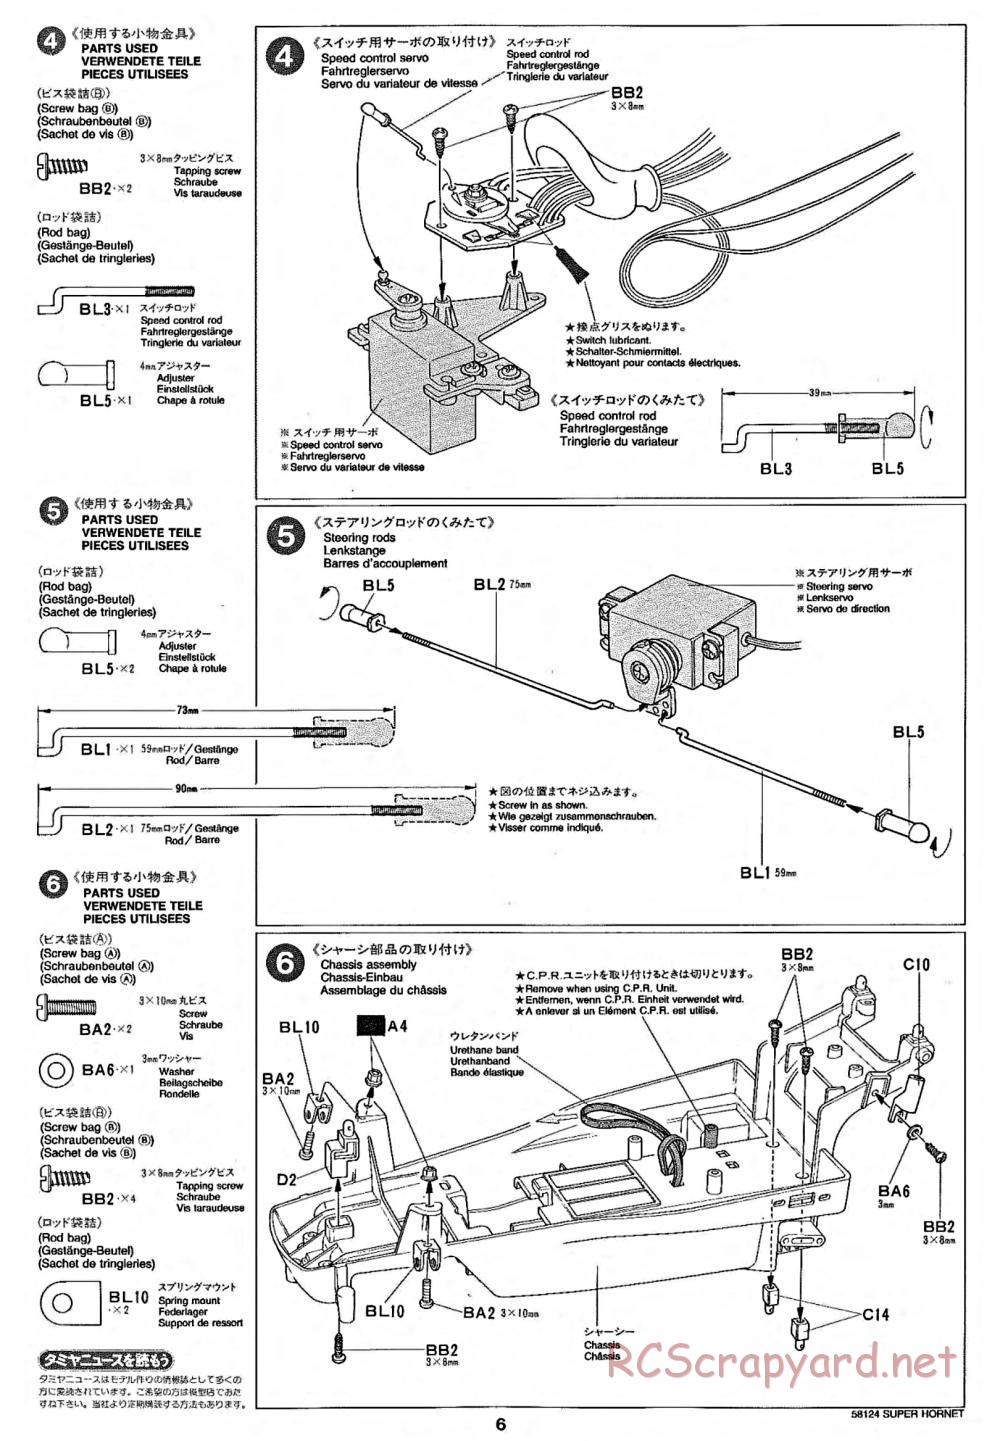 Tamiya - Super Hornet Chassis - Manual - Page 6